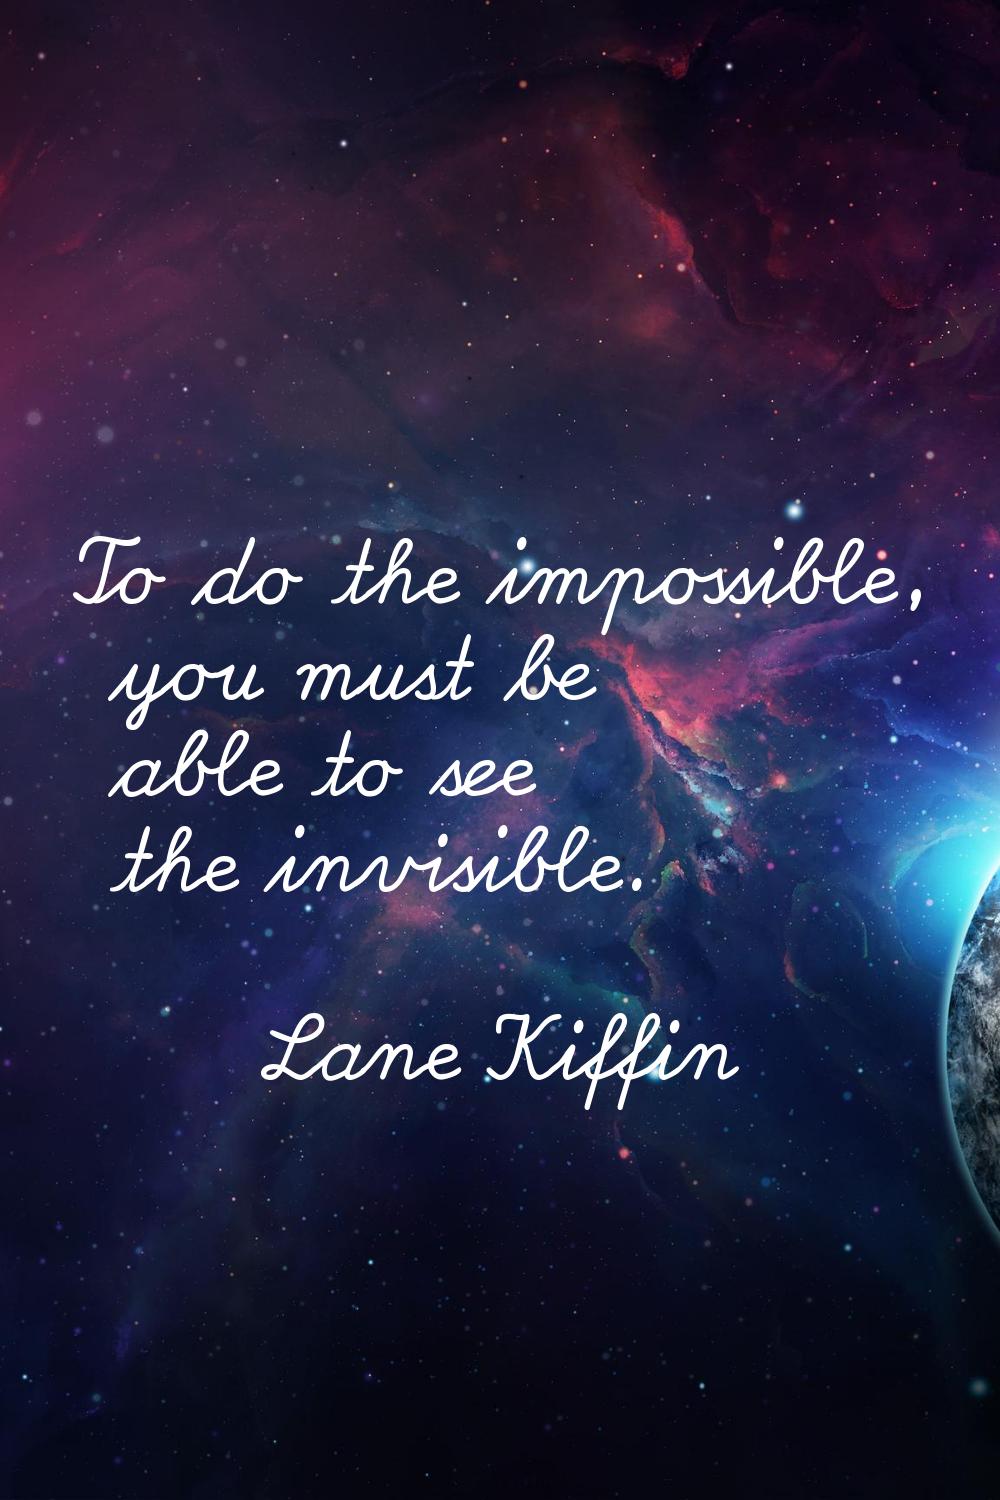 To do the impossible, you must be able to see the invisible.